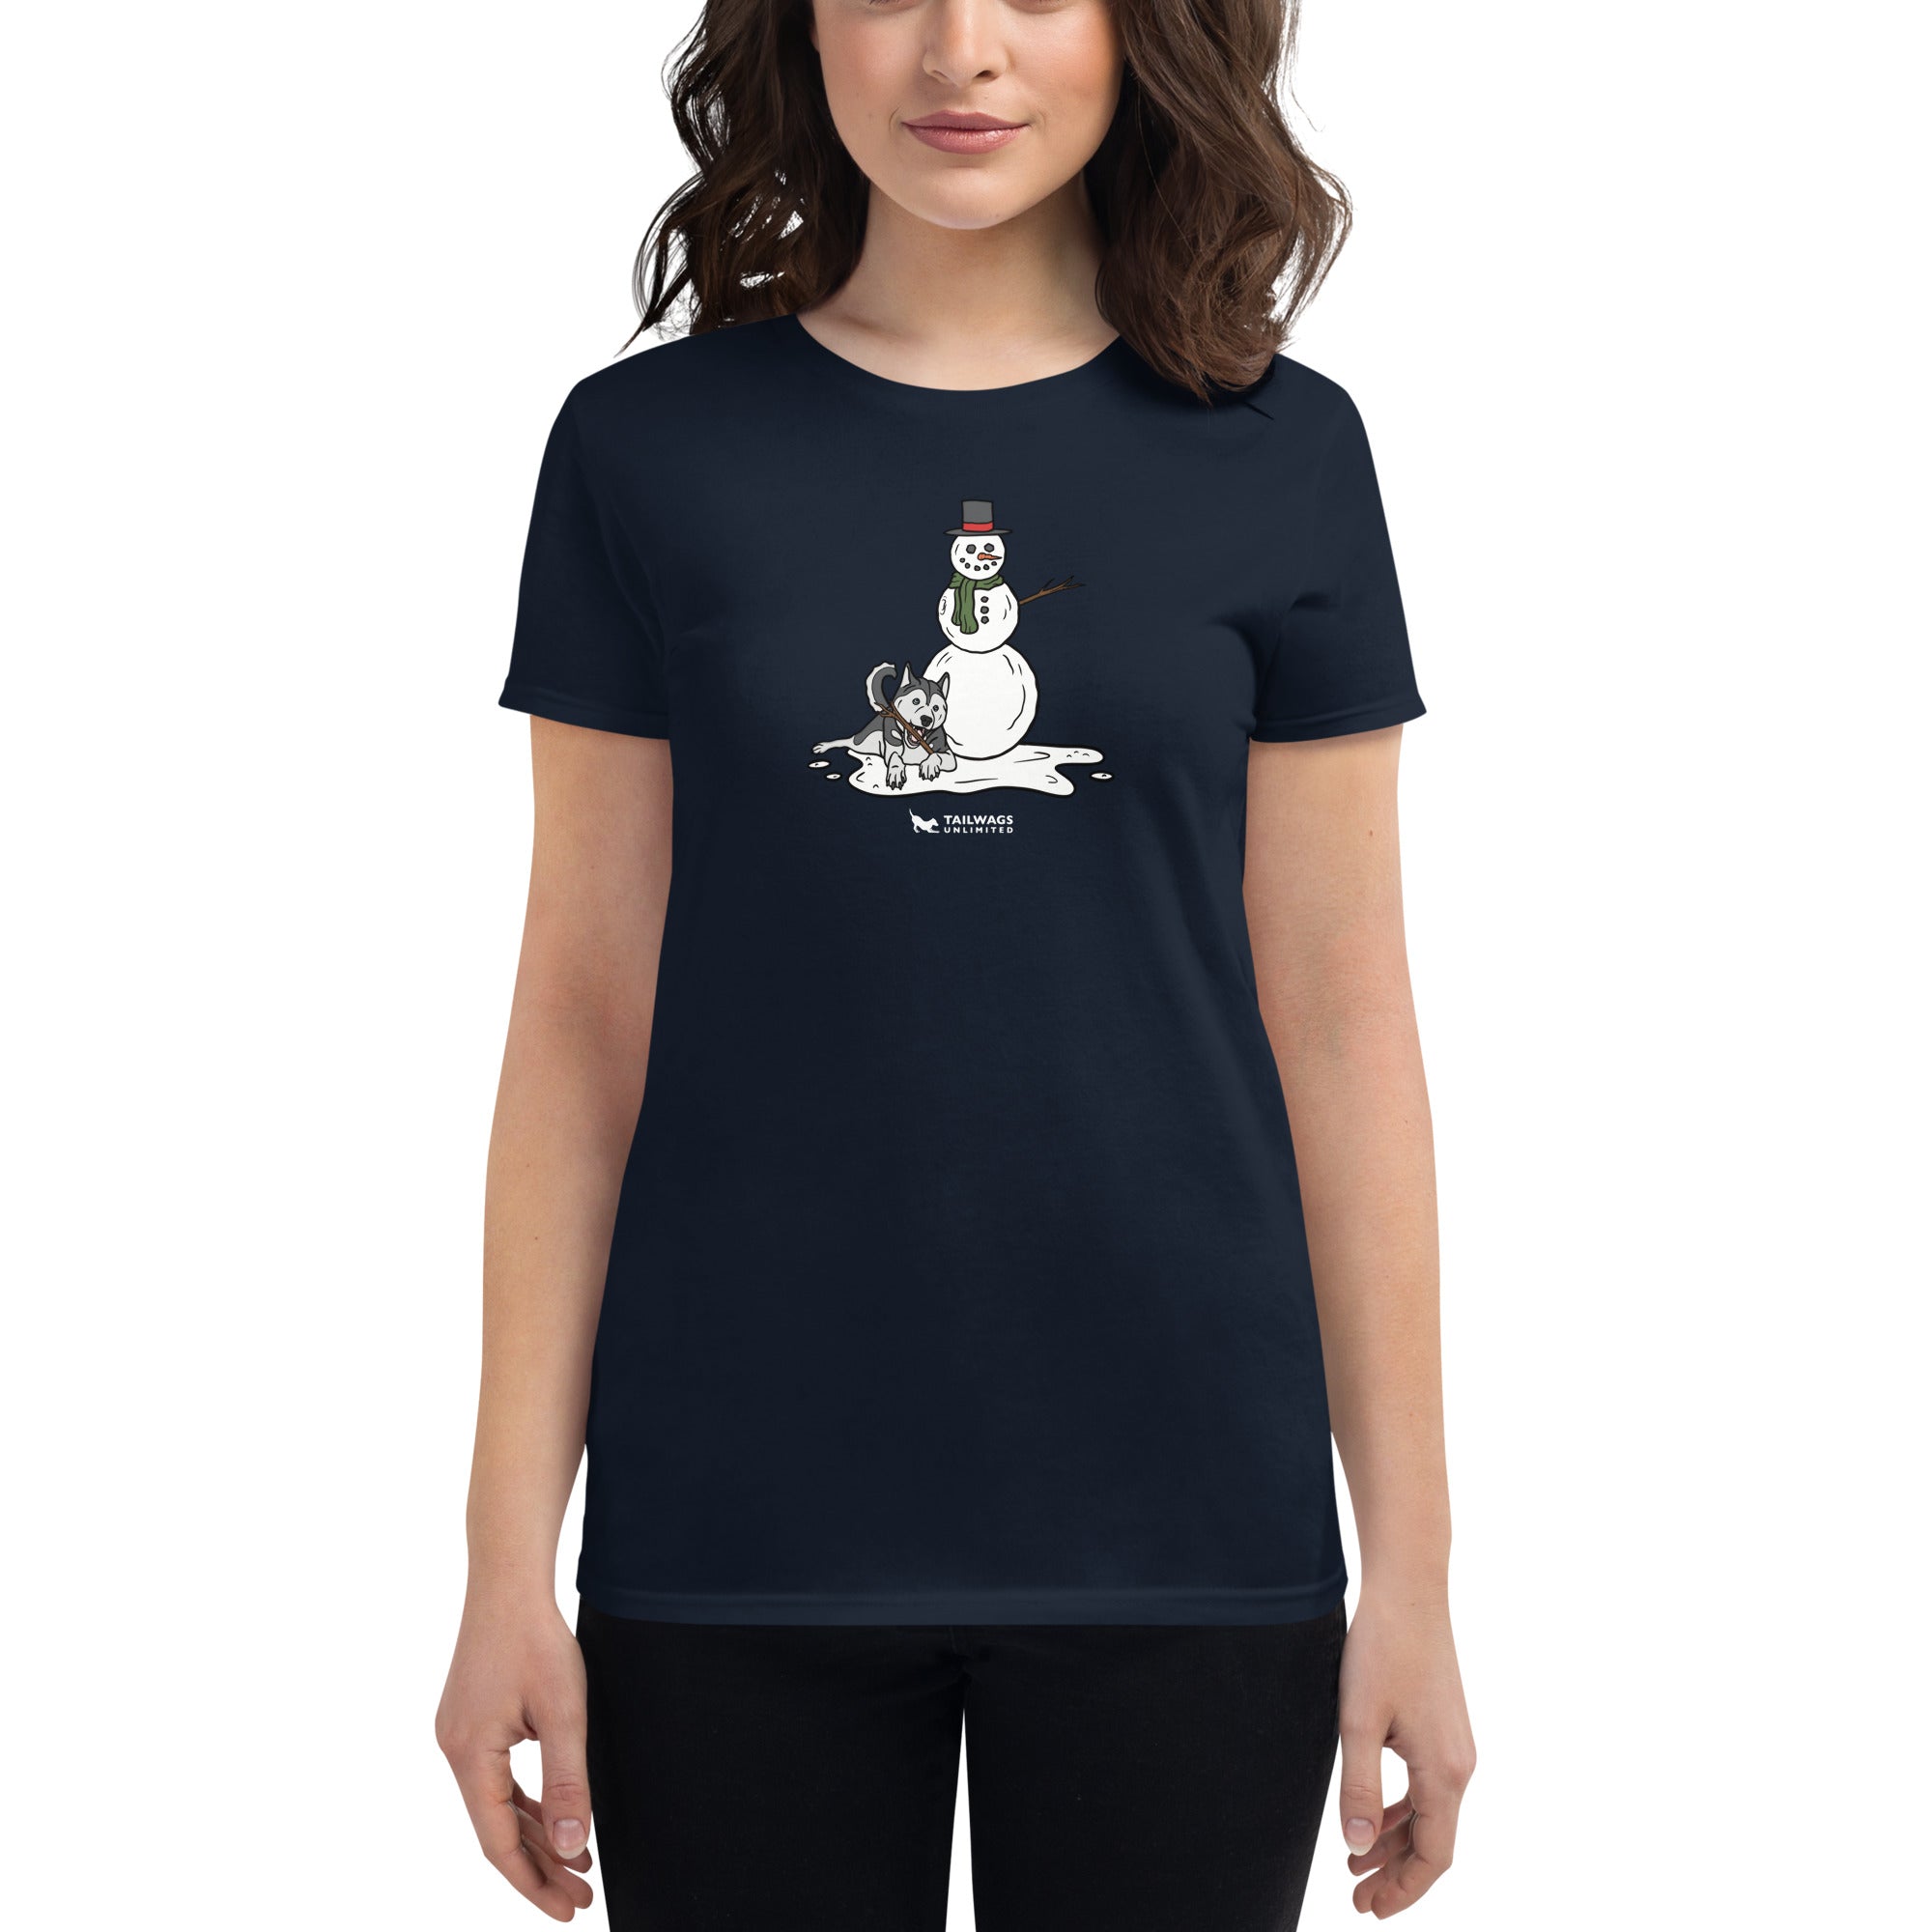 Favorite Chewing Stick Women's Fit T-Shirt - TAILWAGS UNLIMITED